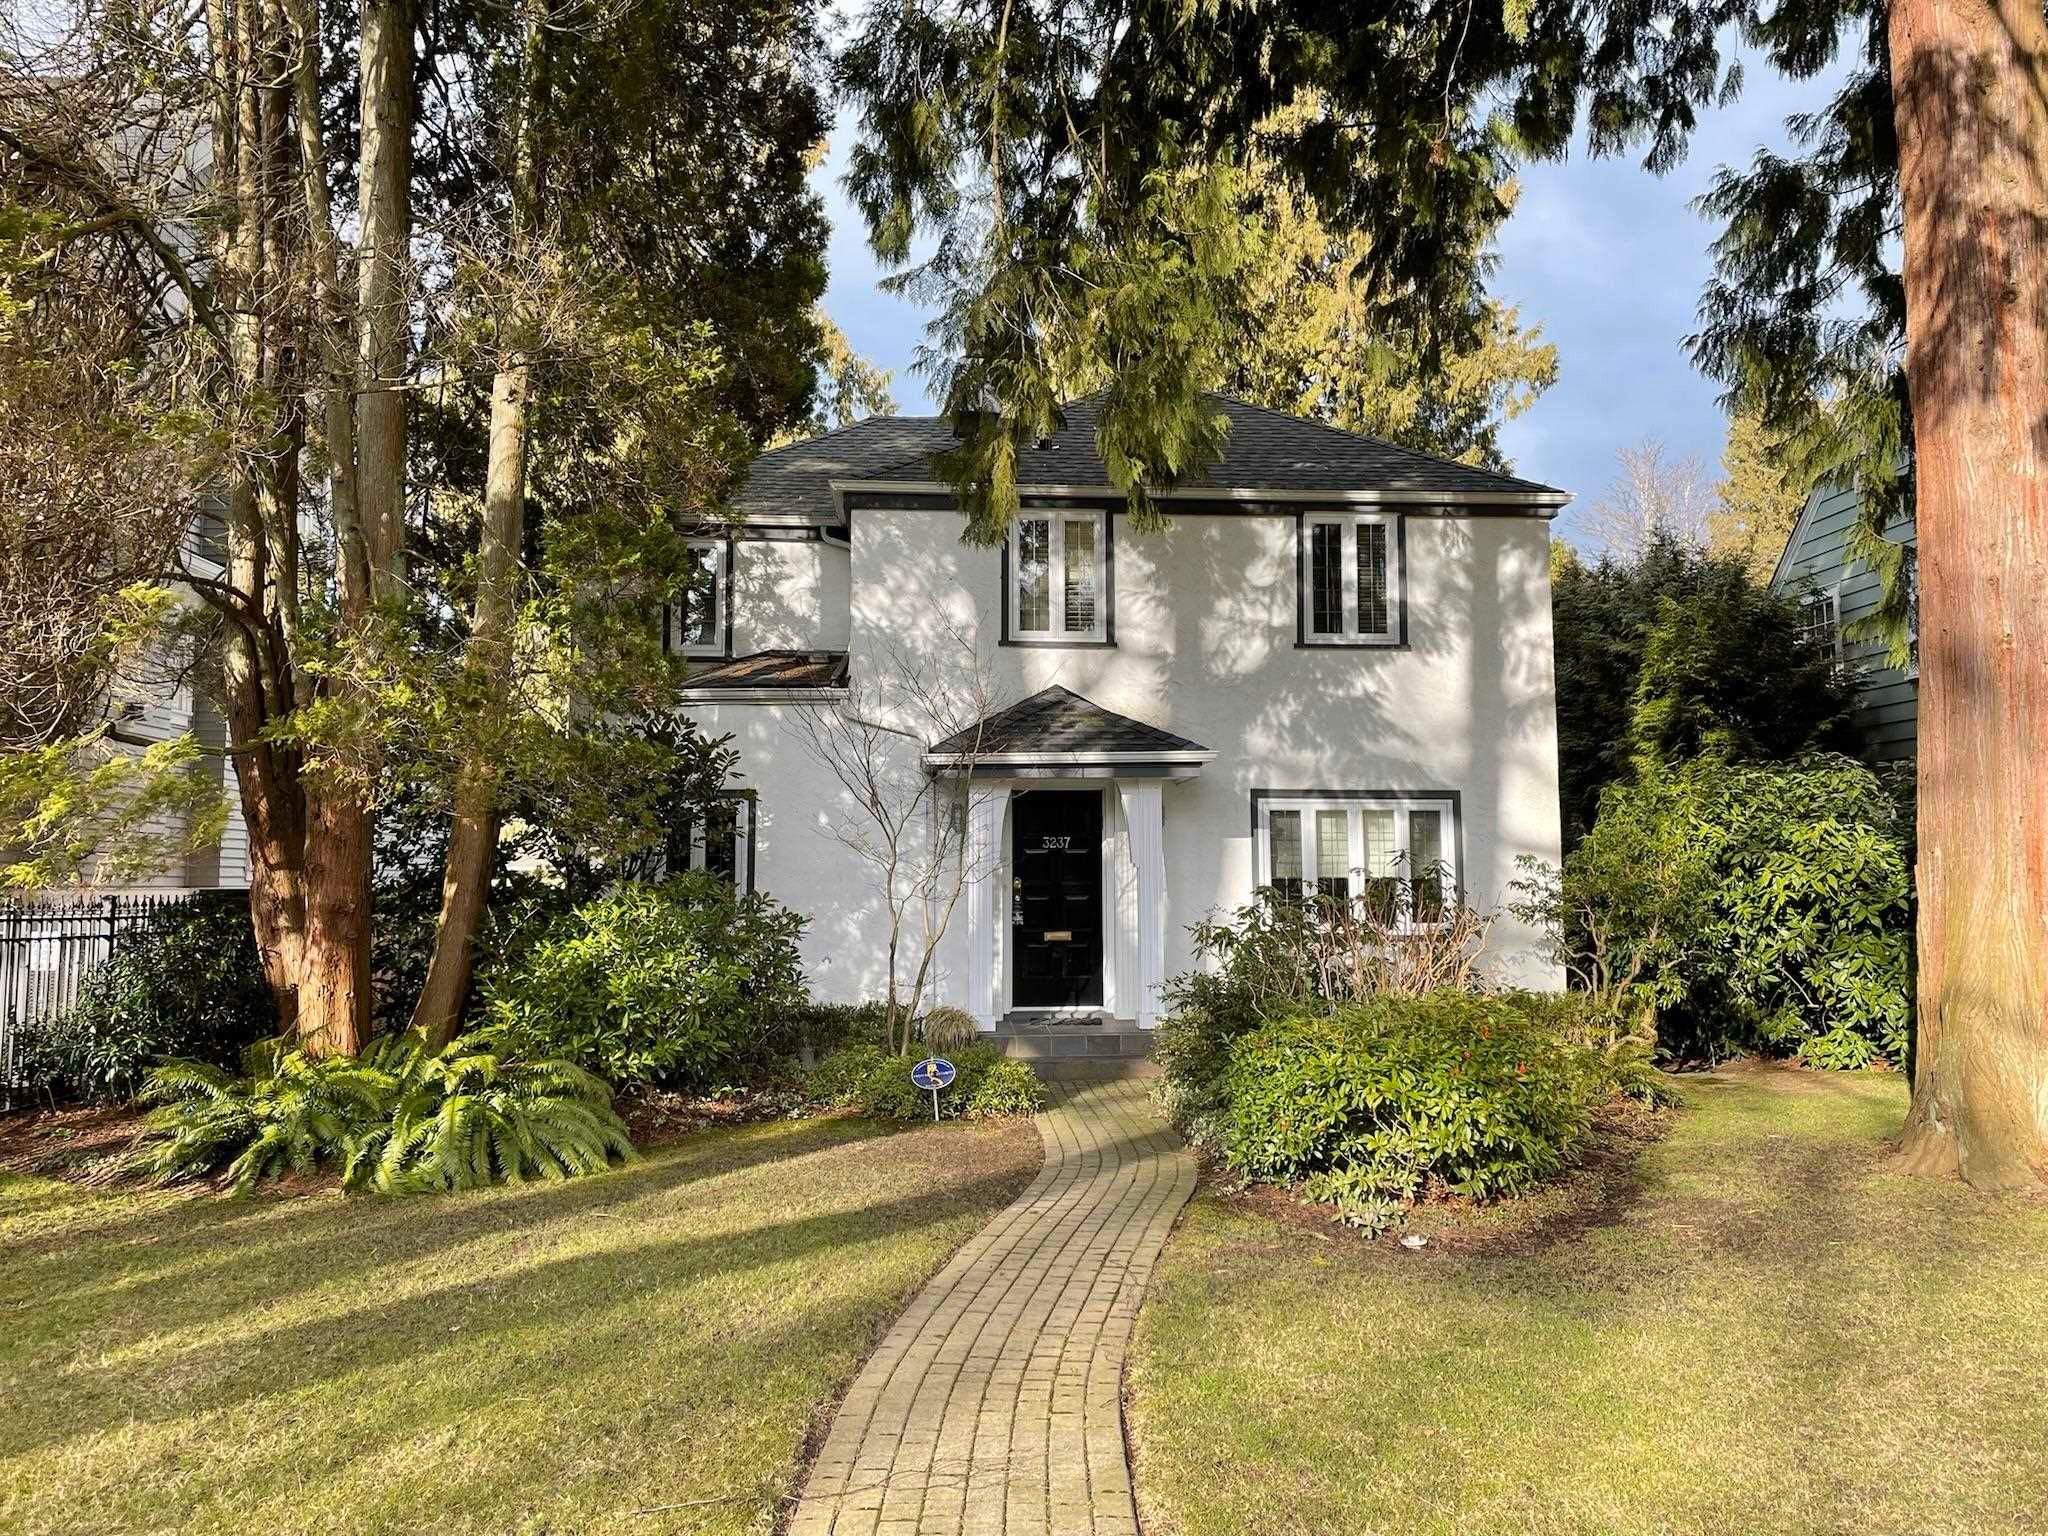 New property listed in MacKenzie Heights, Vancouver West